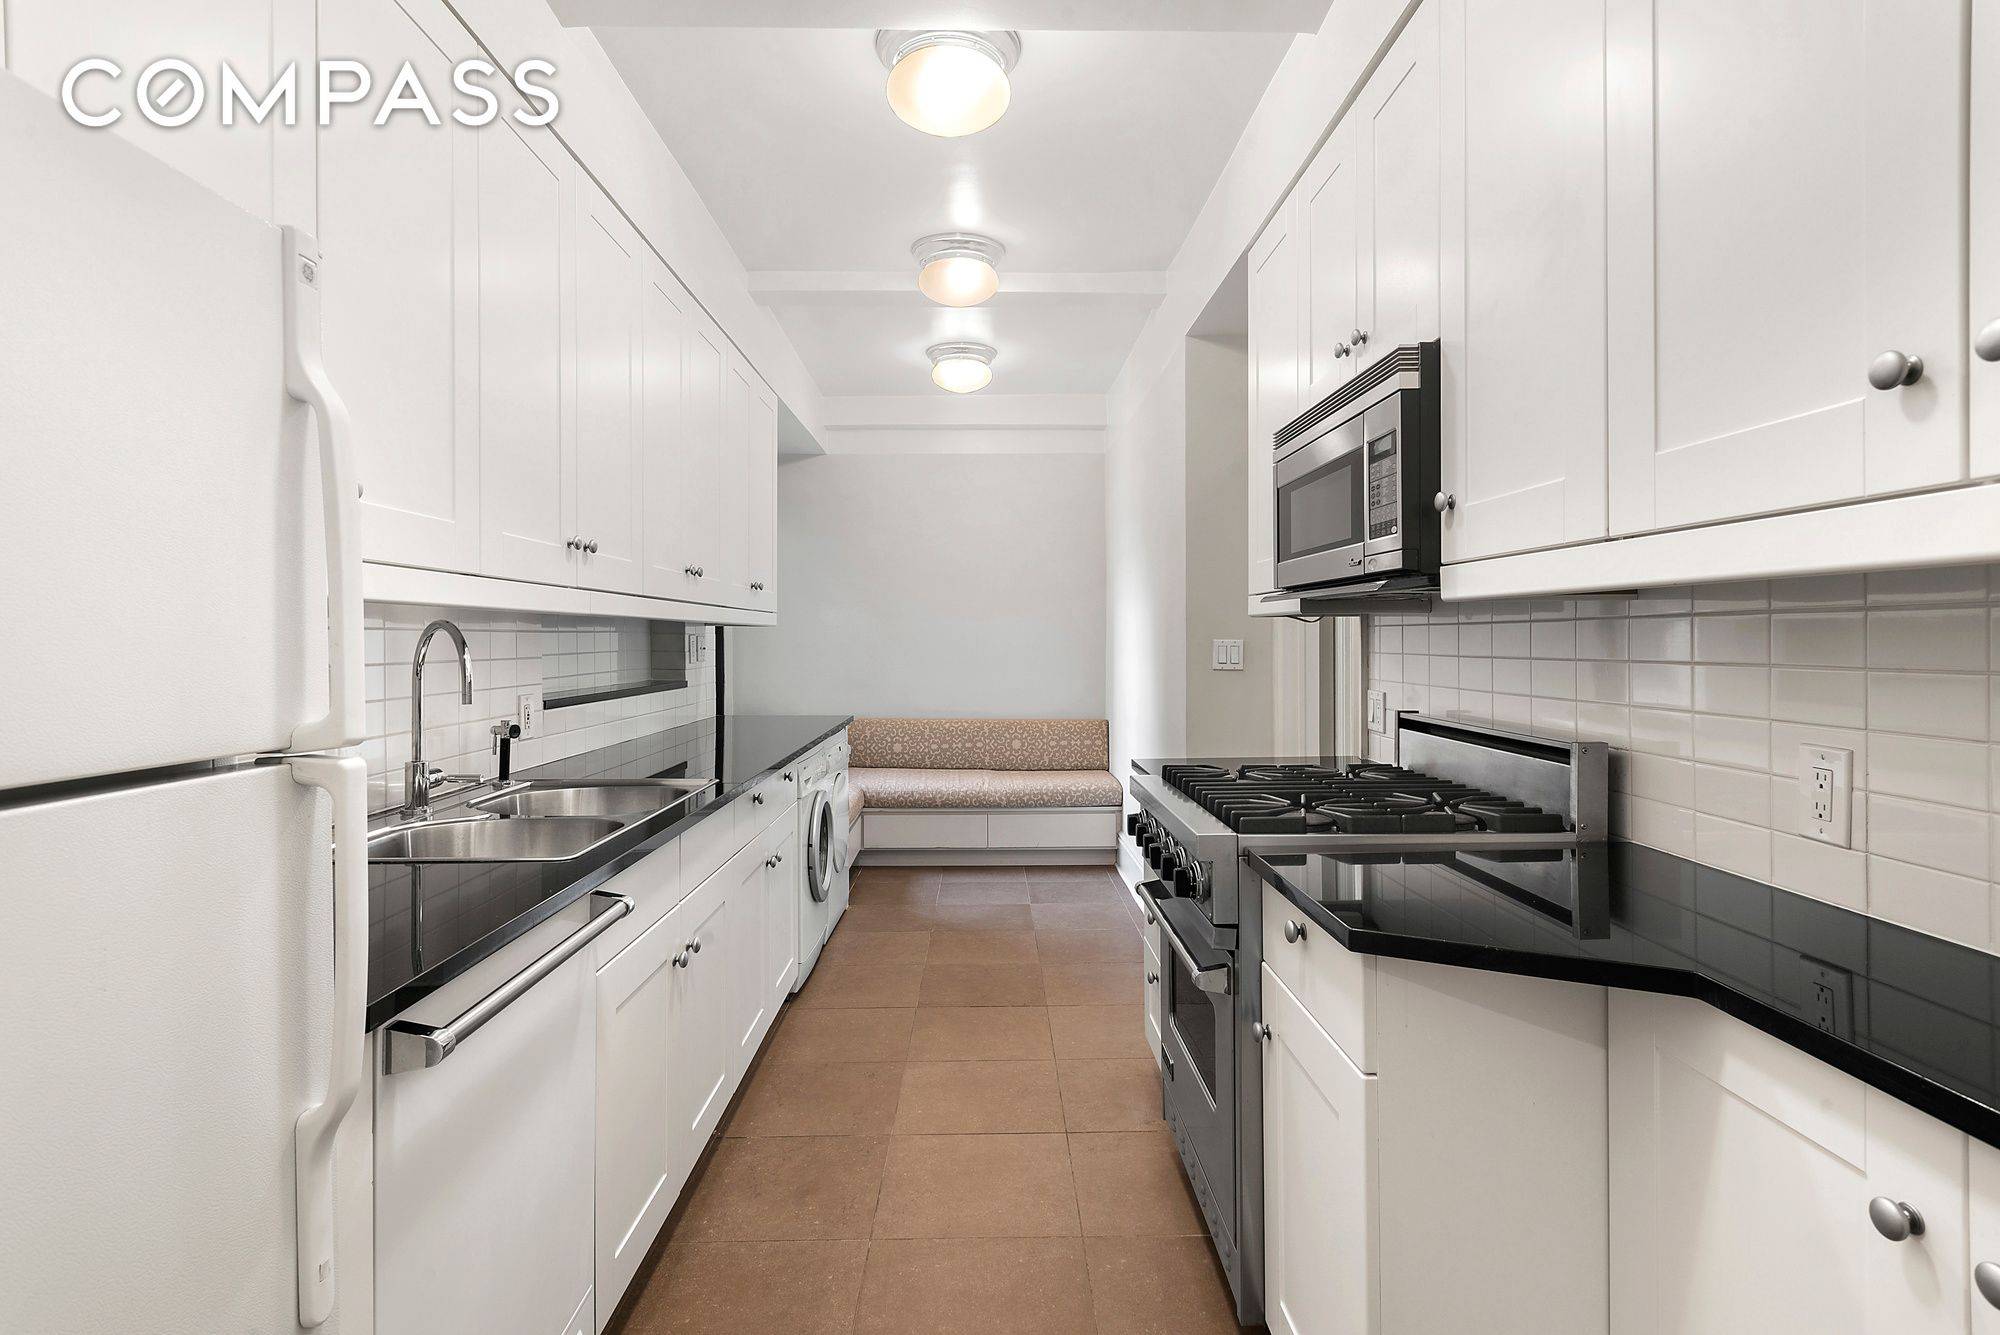 Oversized, renovated 1 bedroom 842SF in full service condo in the heart of the Upper West Side.